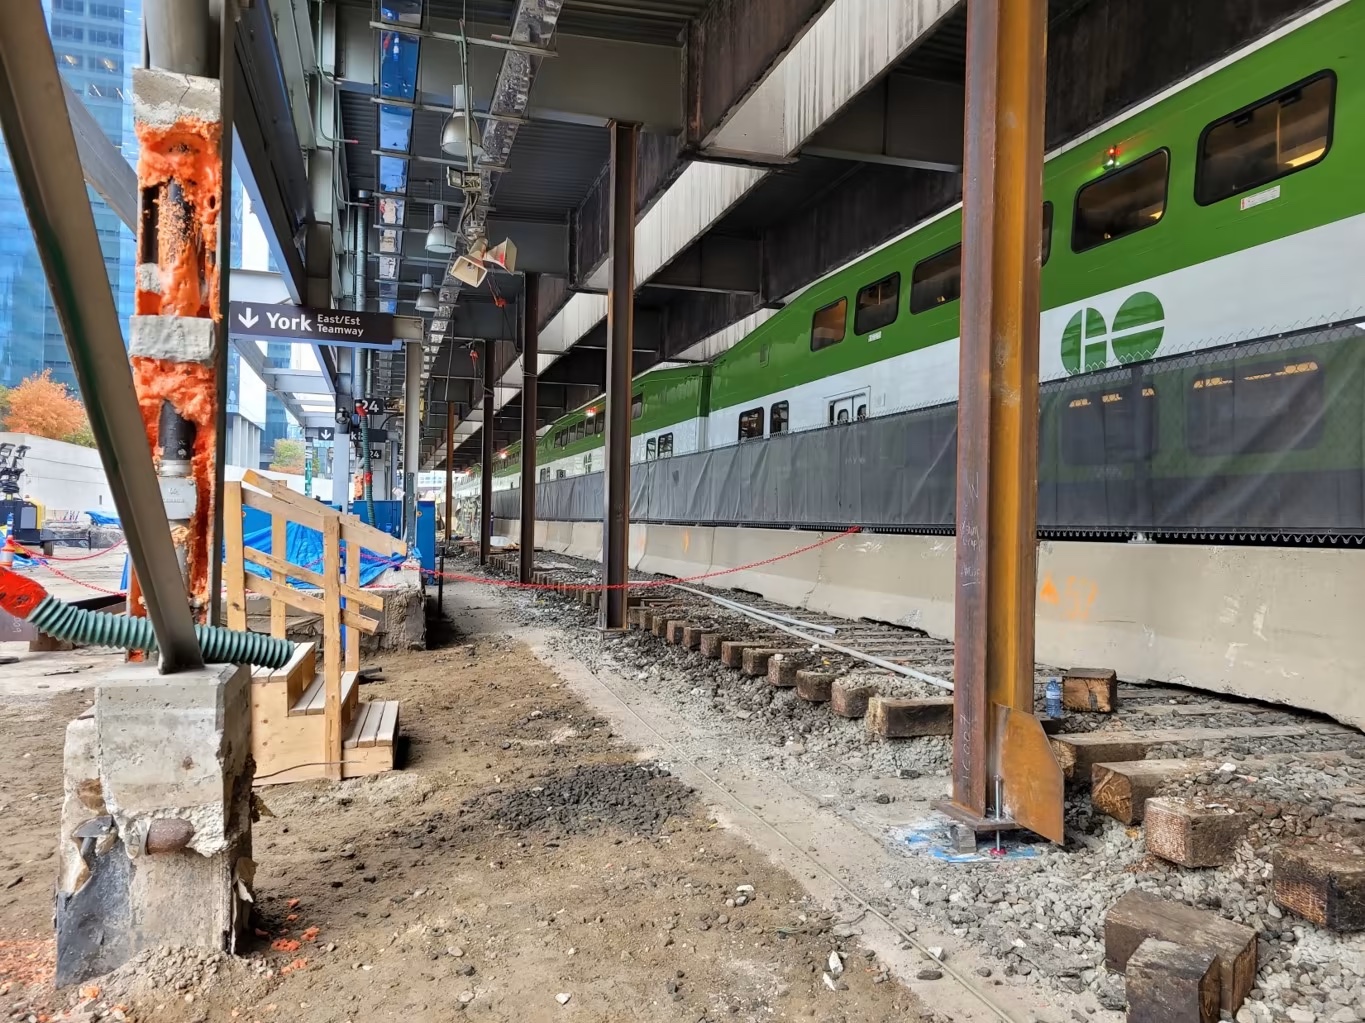 Newly installed structural steel supports along the south side of the heritage trainshed.